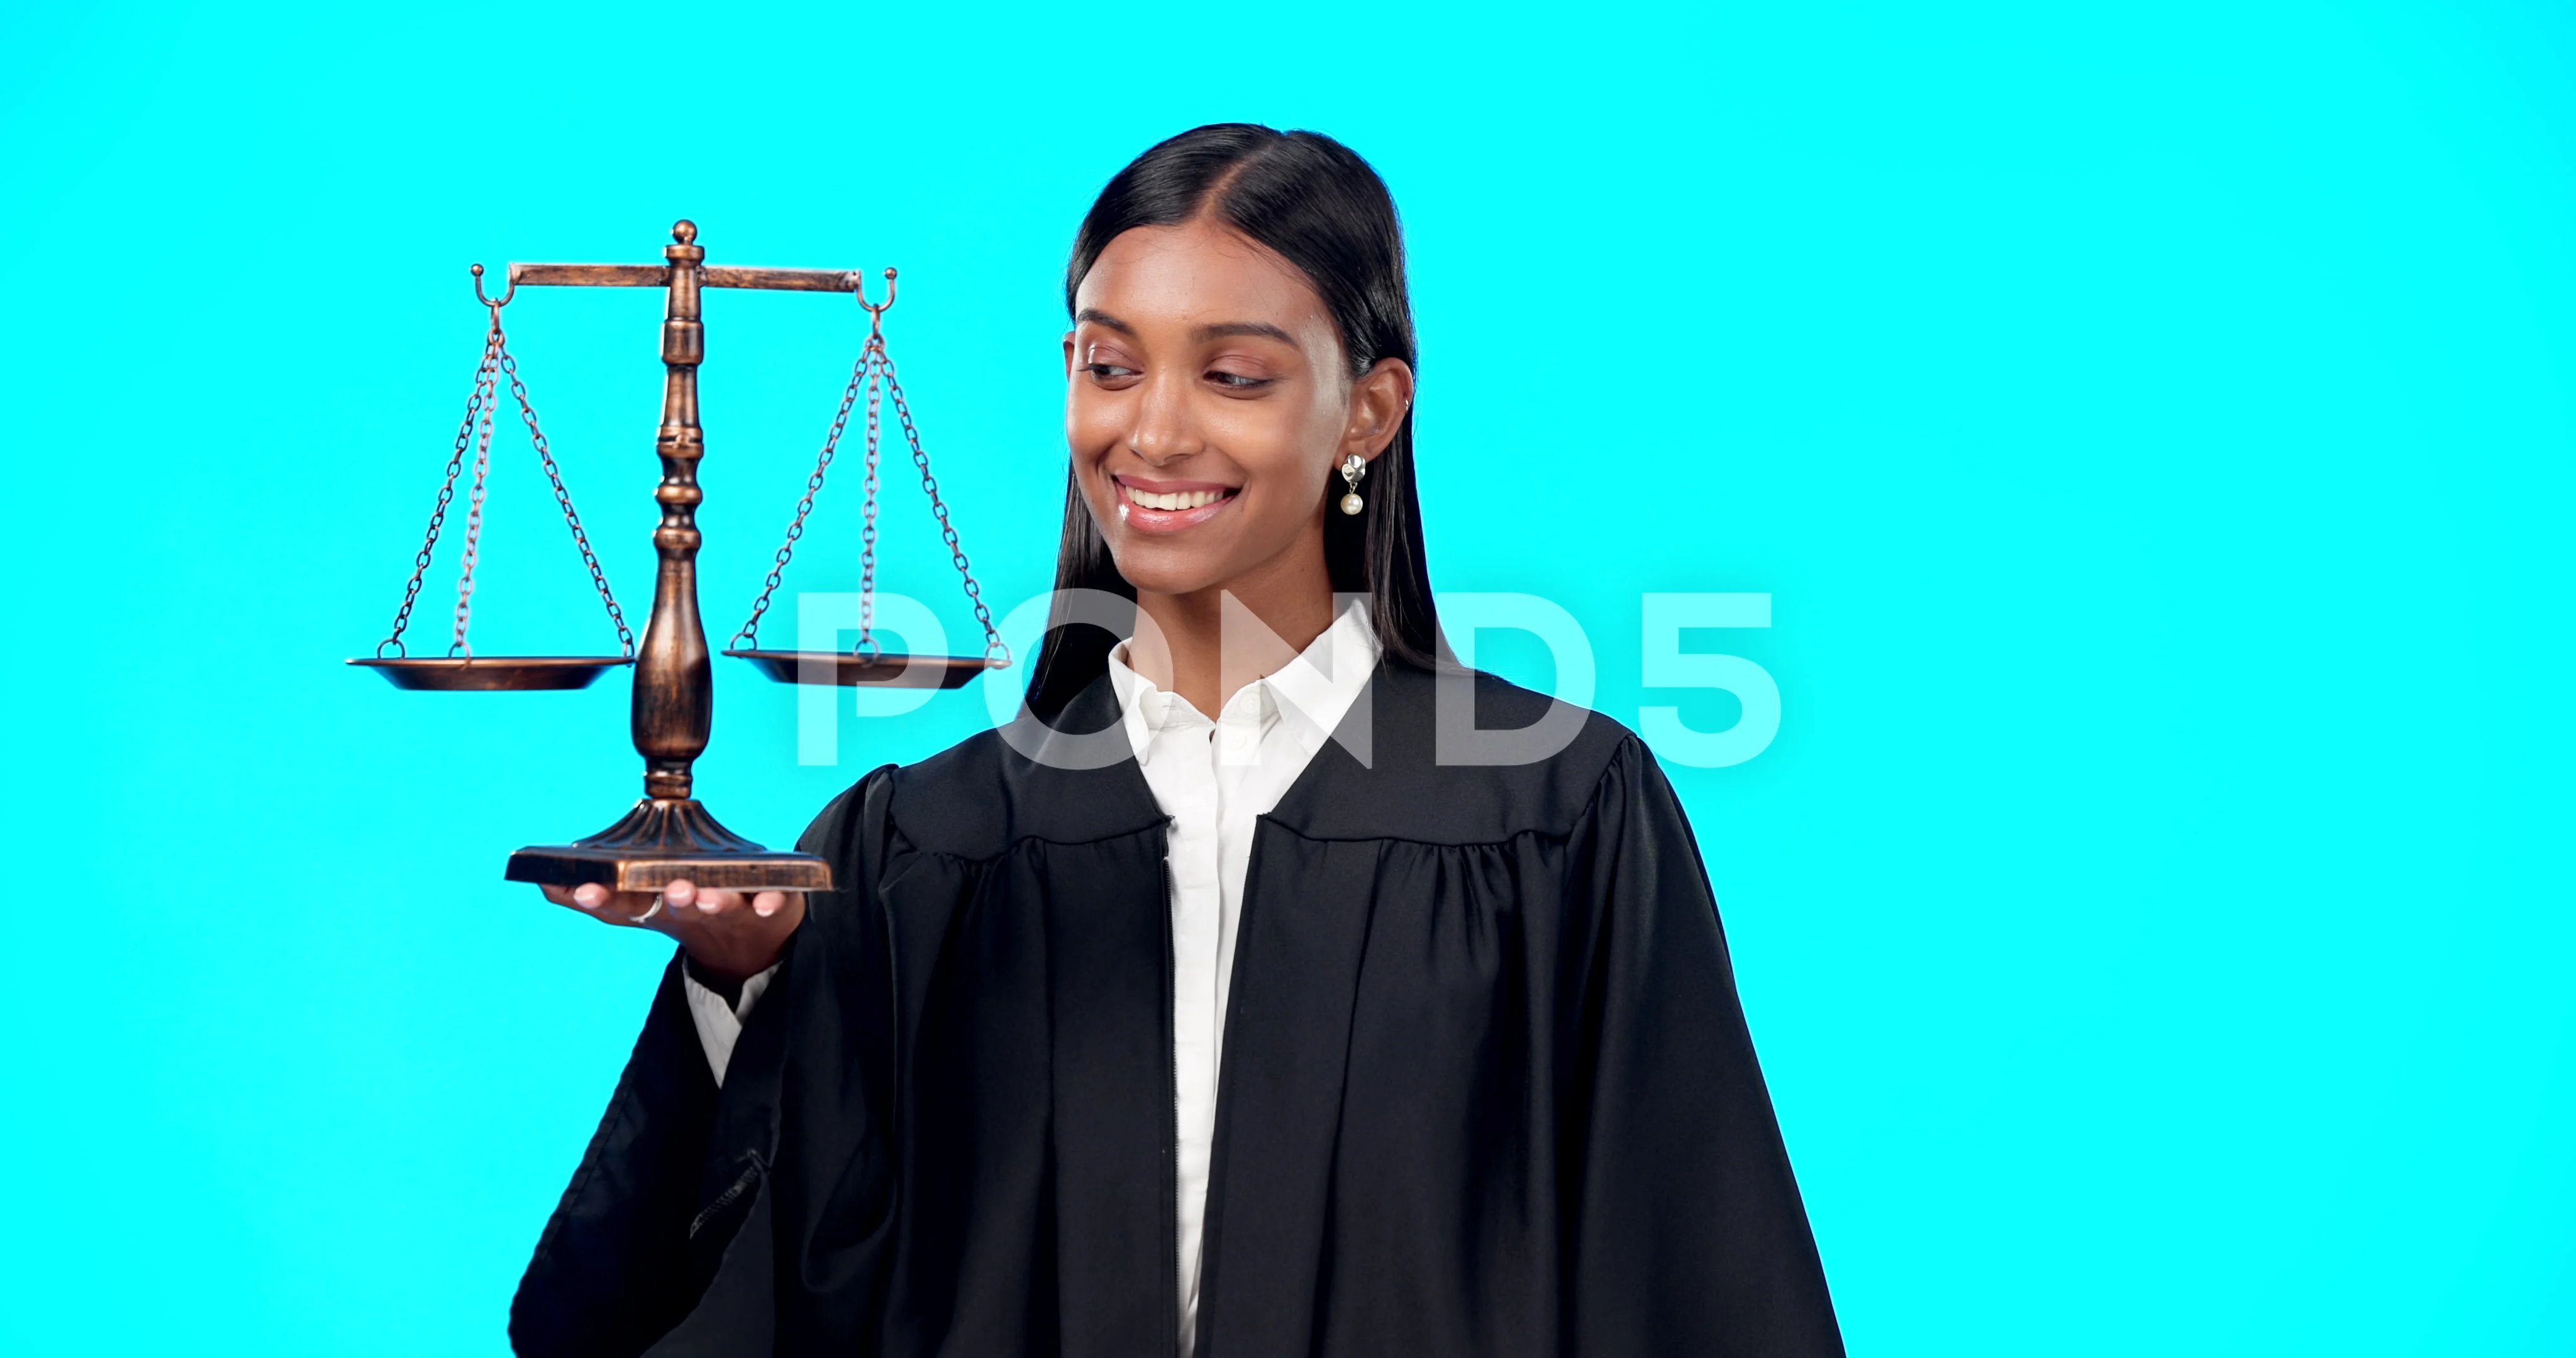 female lawyer clipart